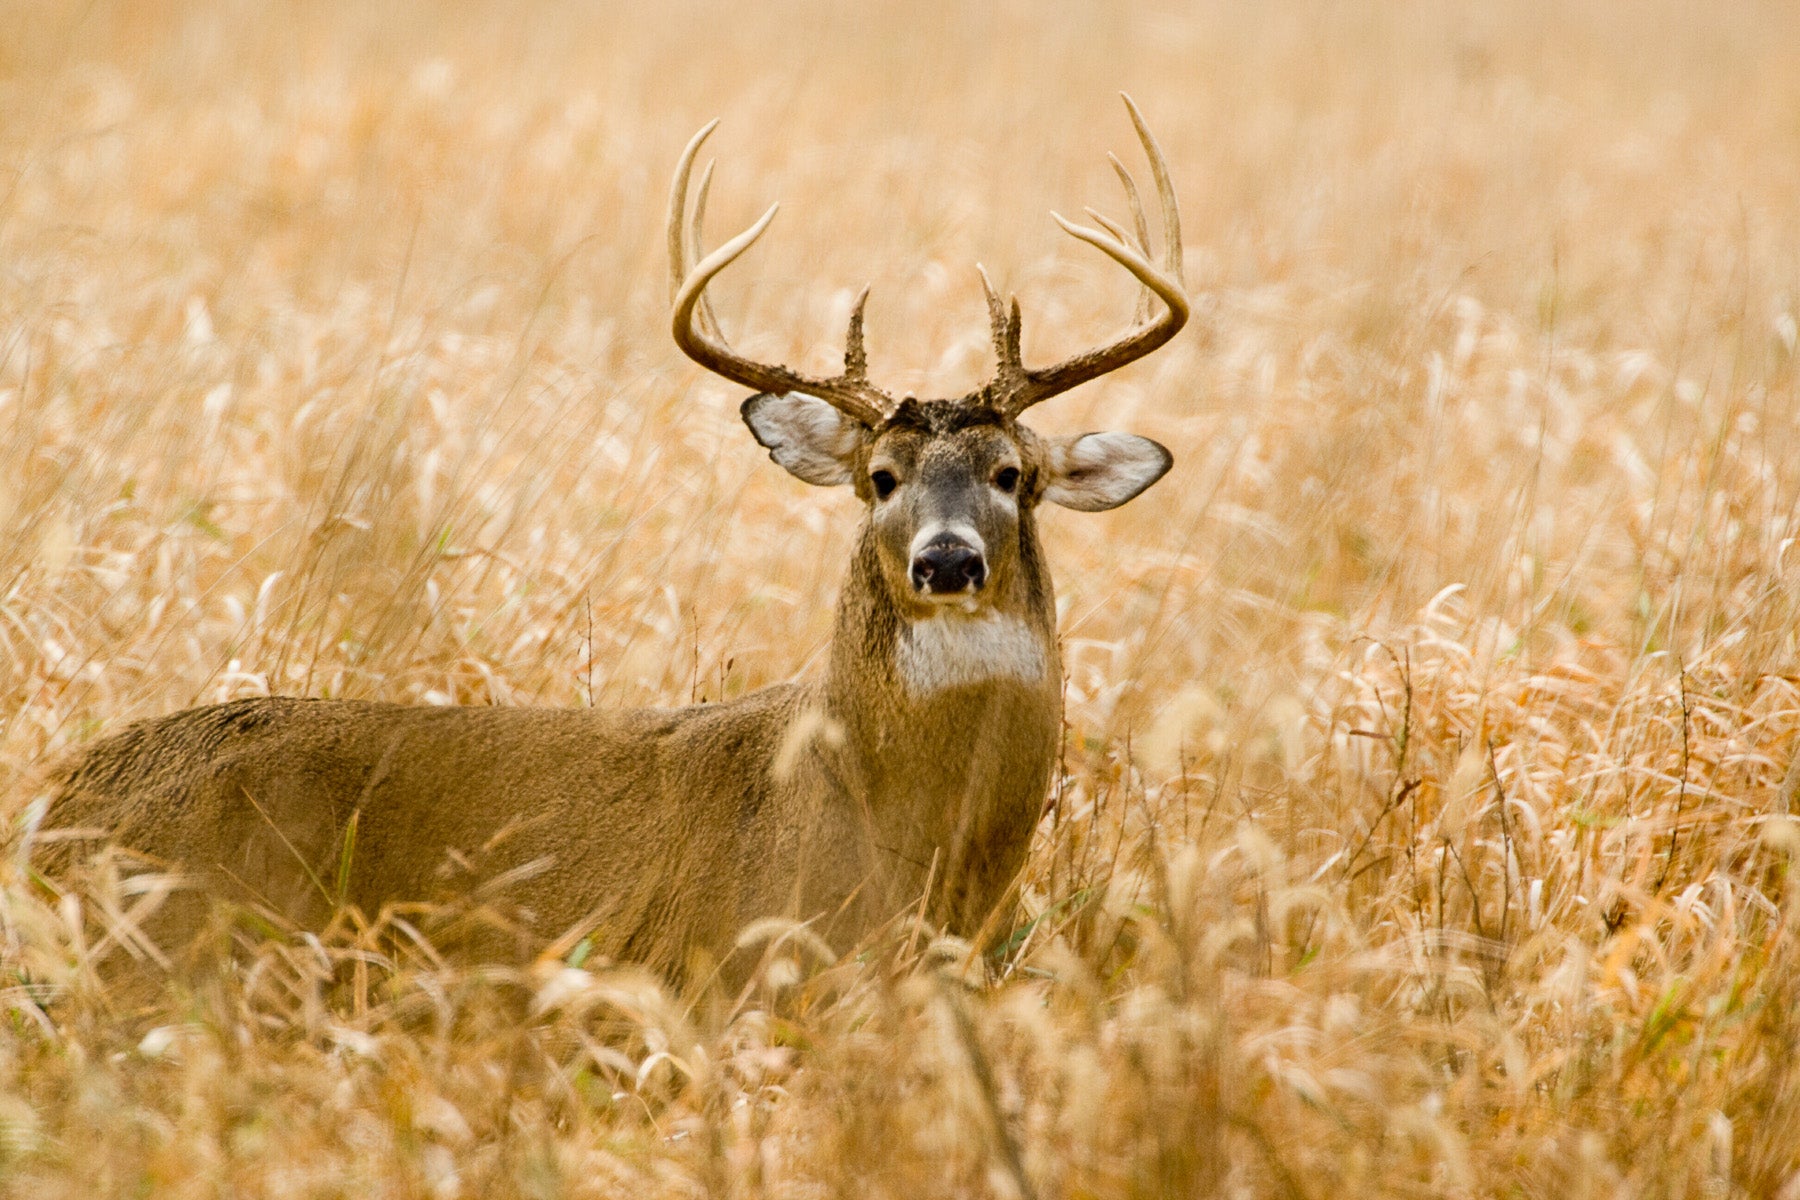 A 10-point white-tailed deer buck stands in a field.